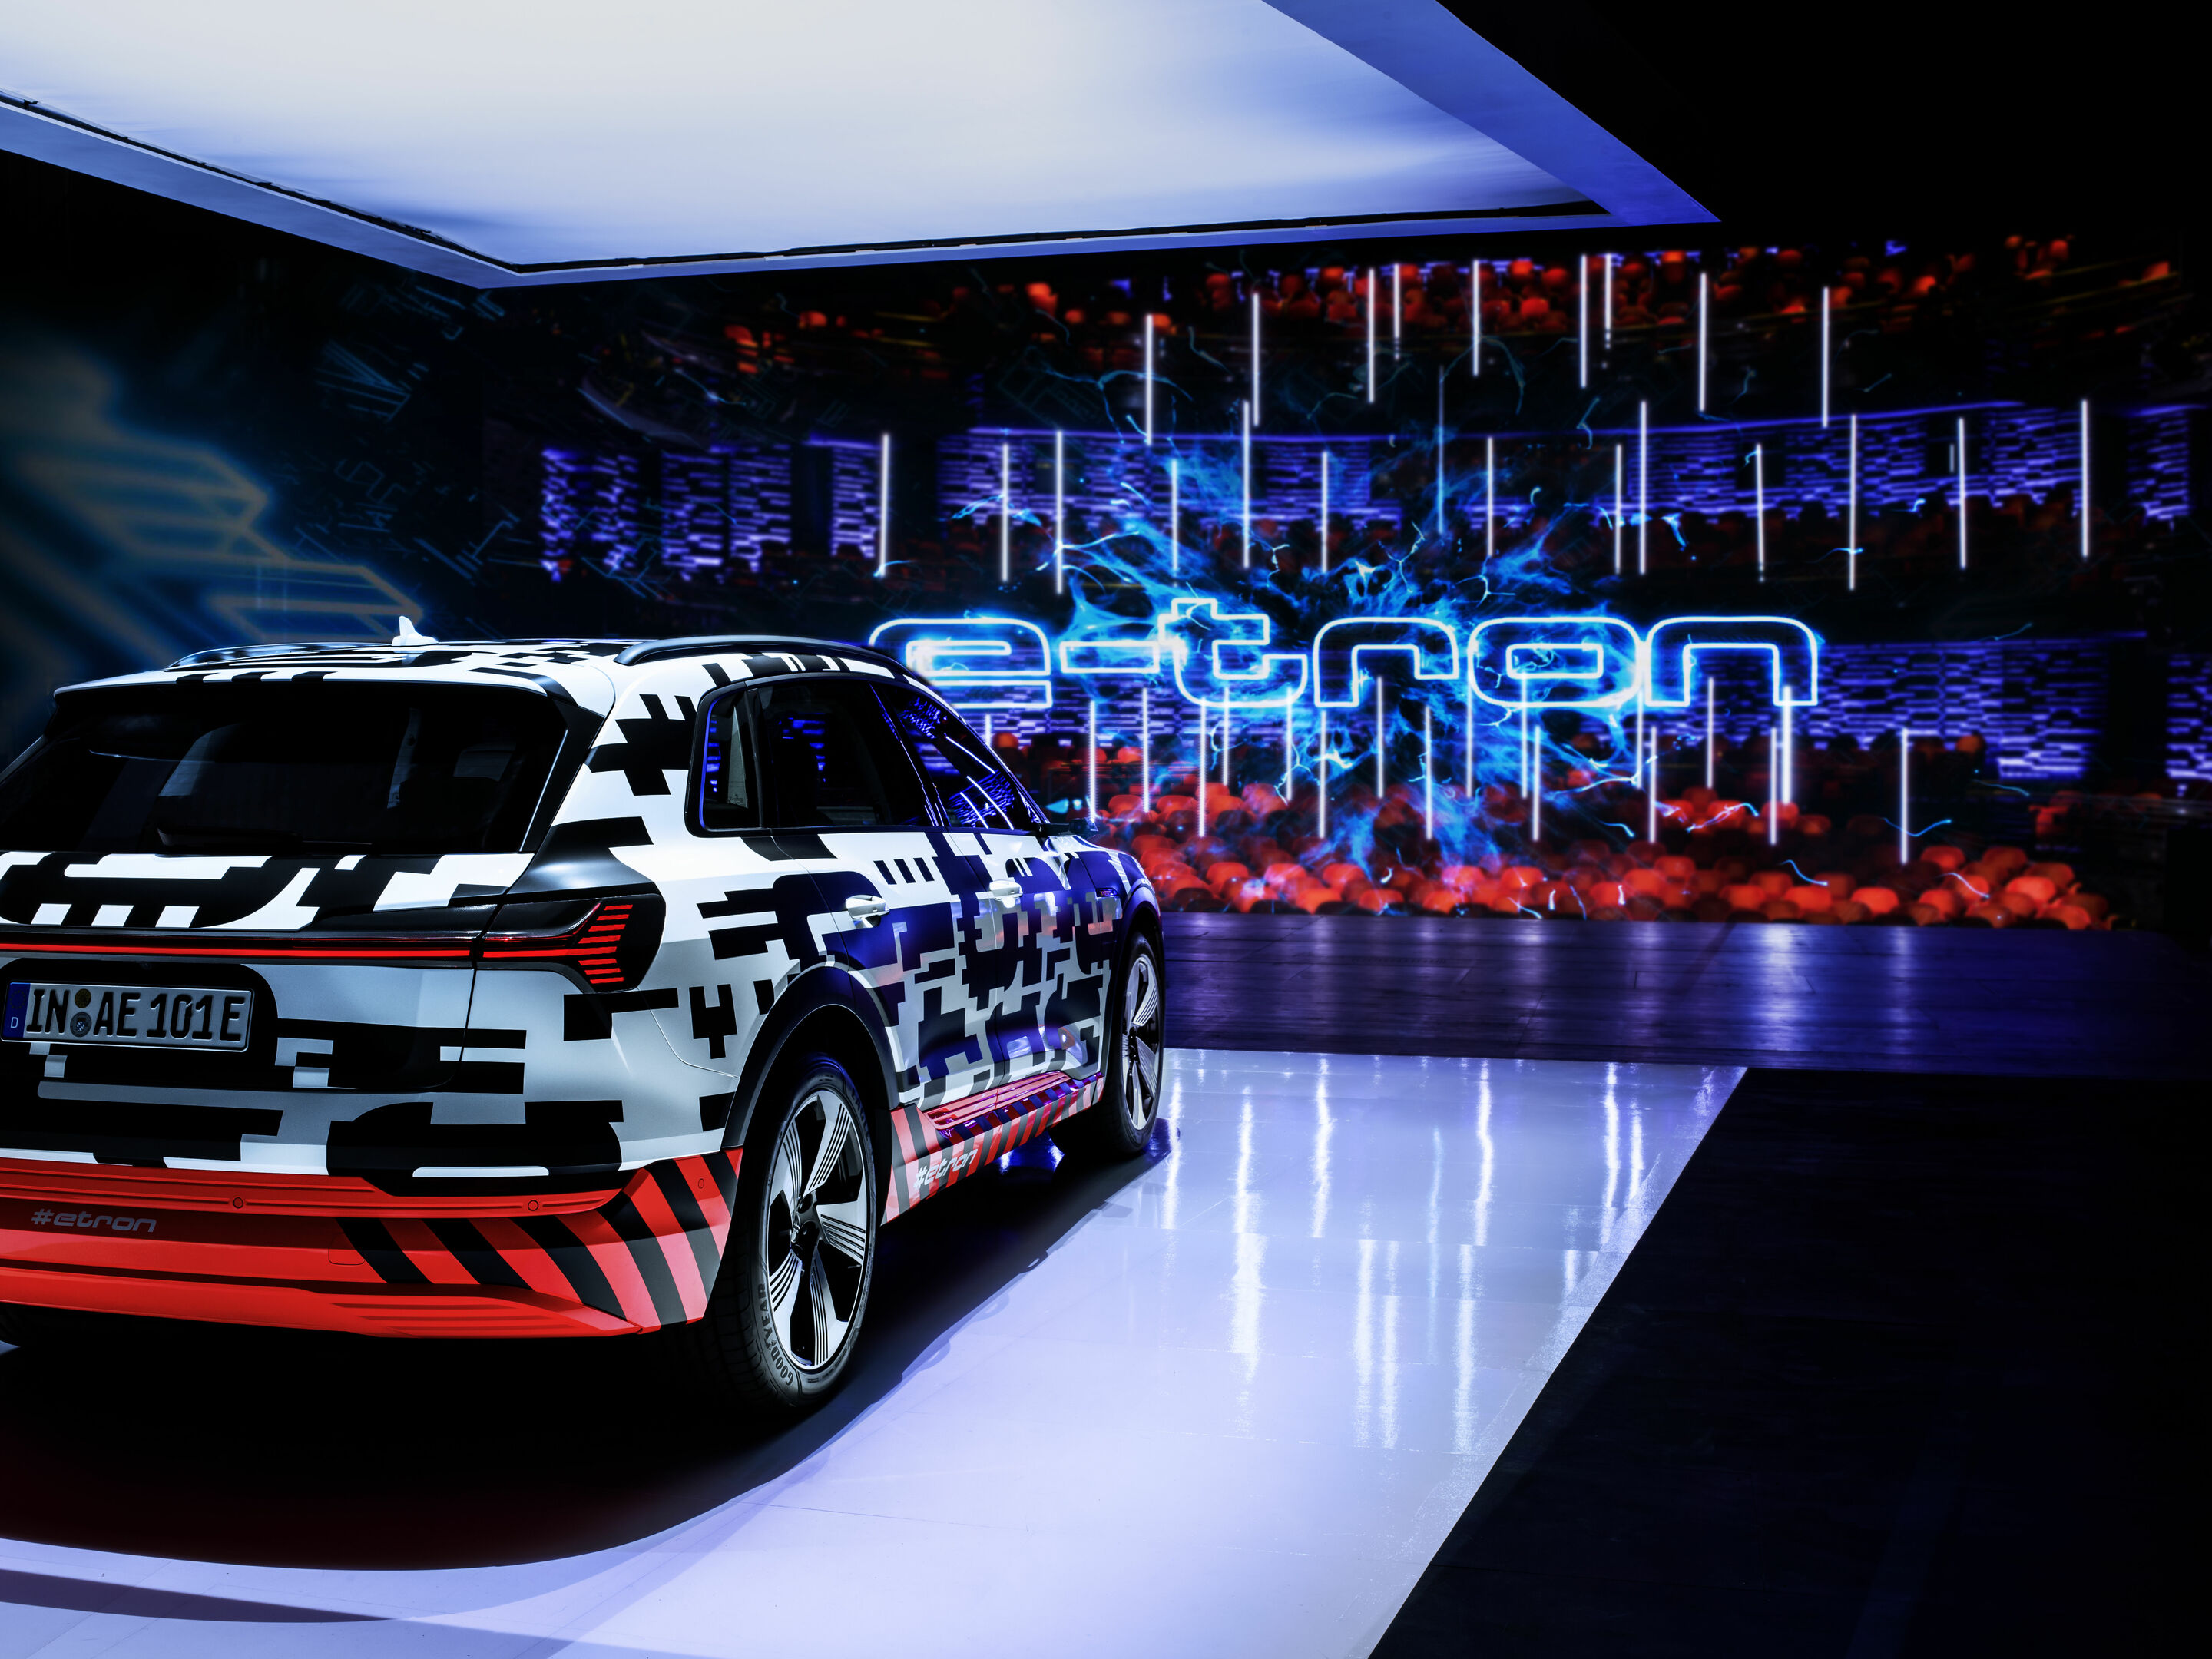 The Audi e-tron prototype on the stage in the Royal Danish Playhouse in Copenhagen